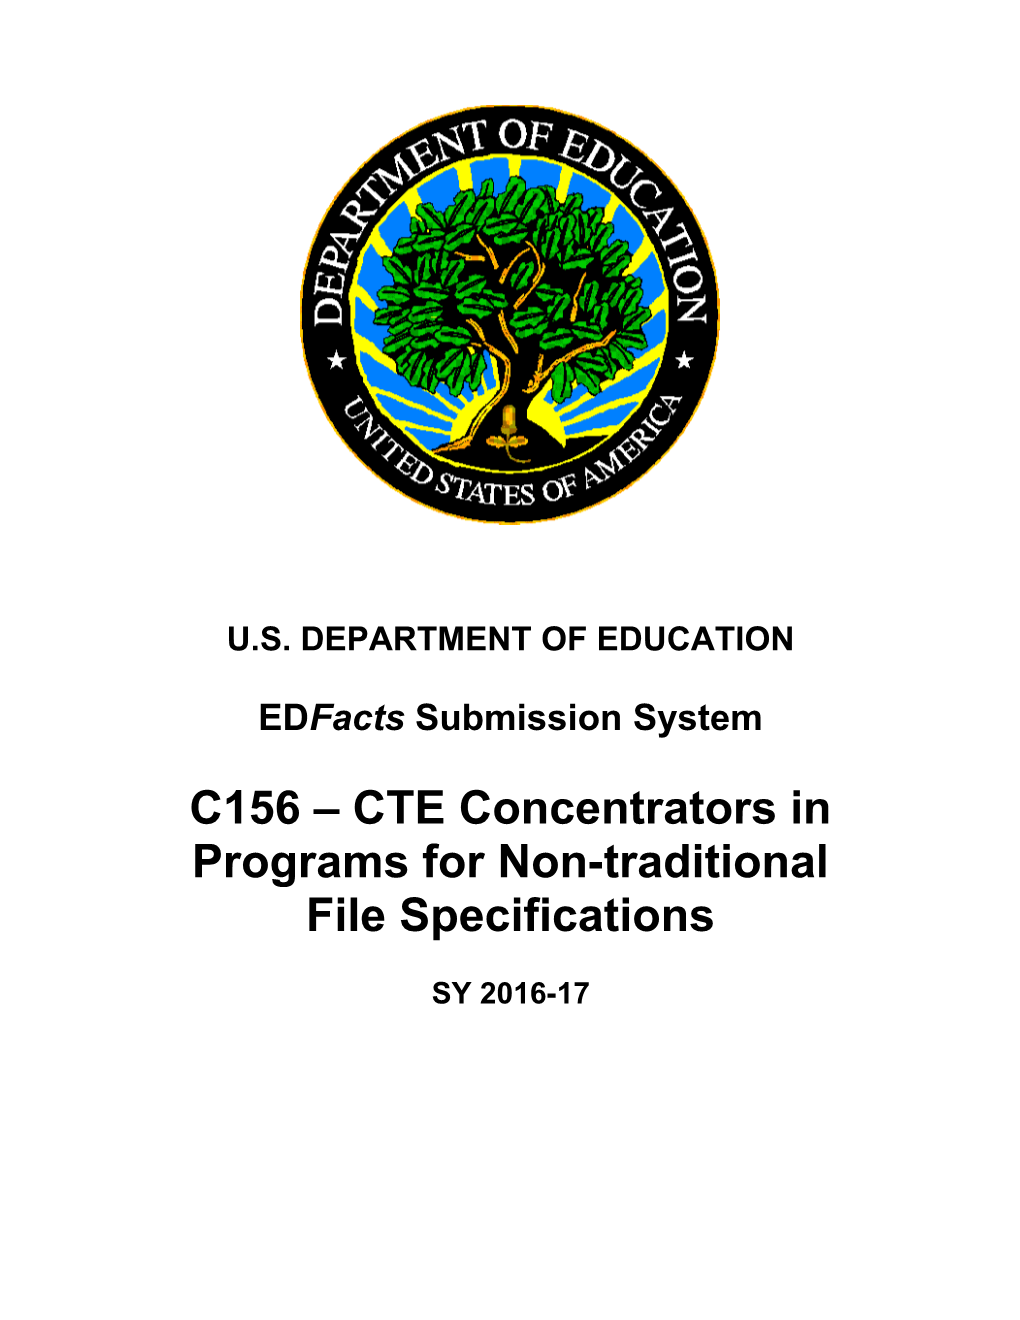 C156 - CTE Concentrators in Programs for Non-Traditional File Specifications (Msword)